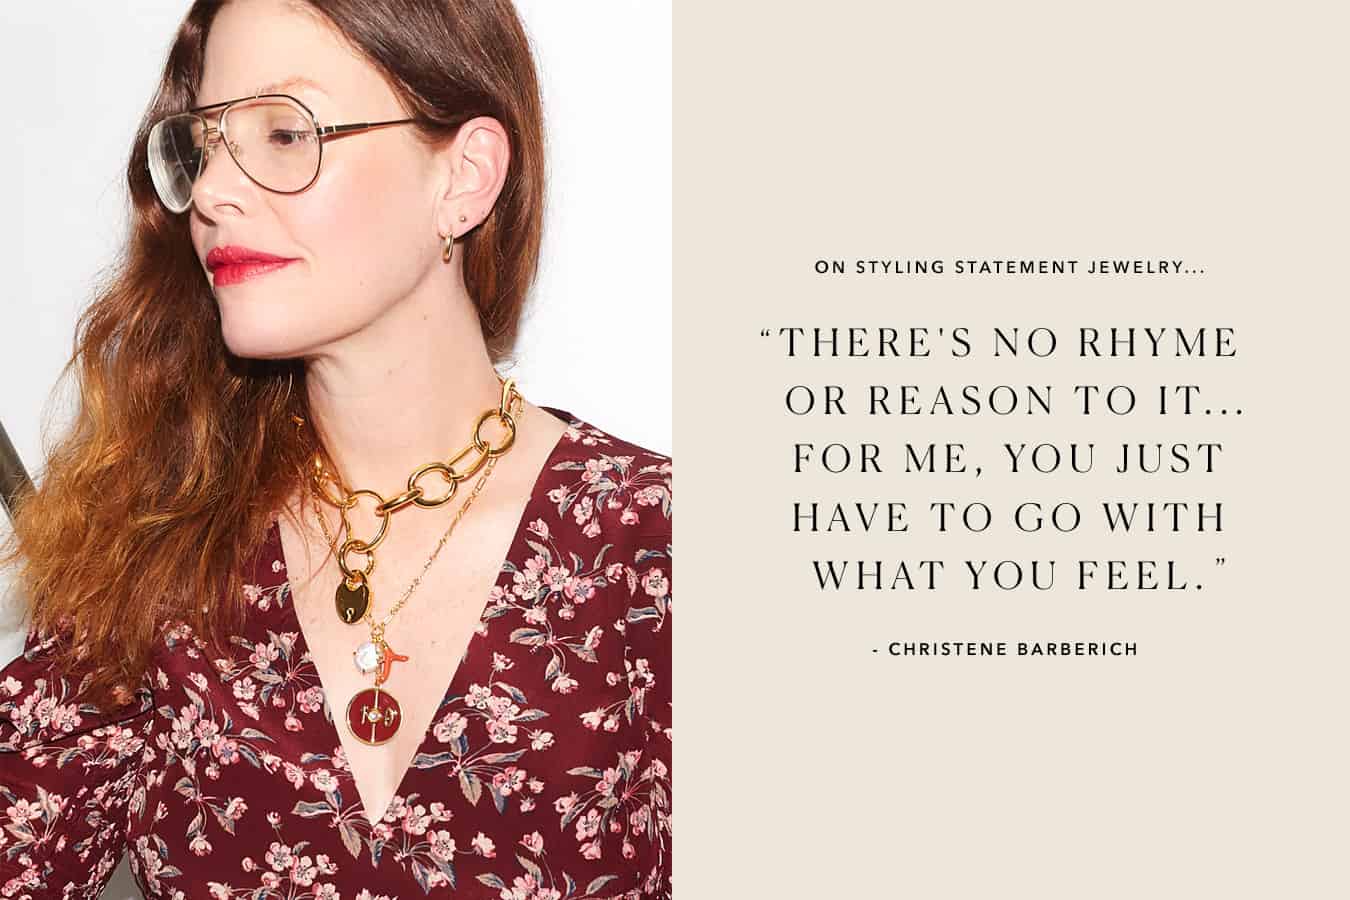 Friends For 10: Christene Barberich of Refinery29 1